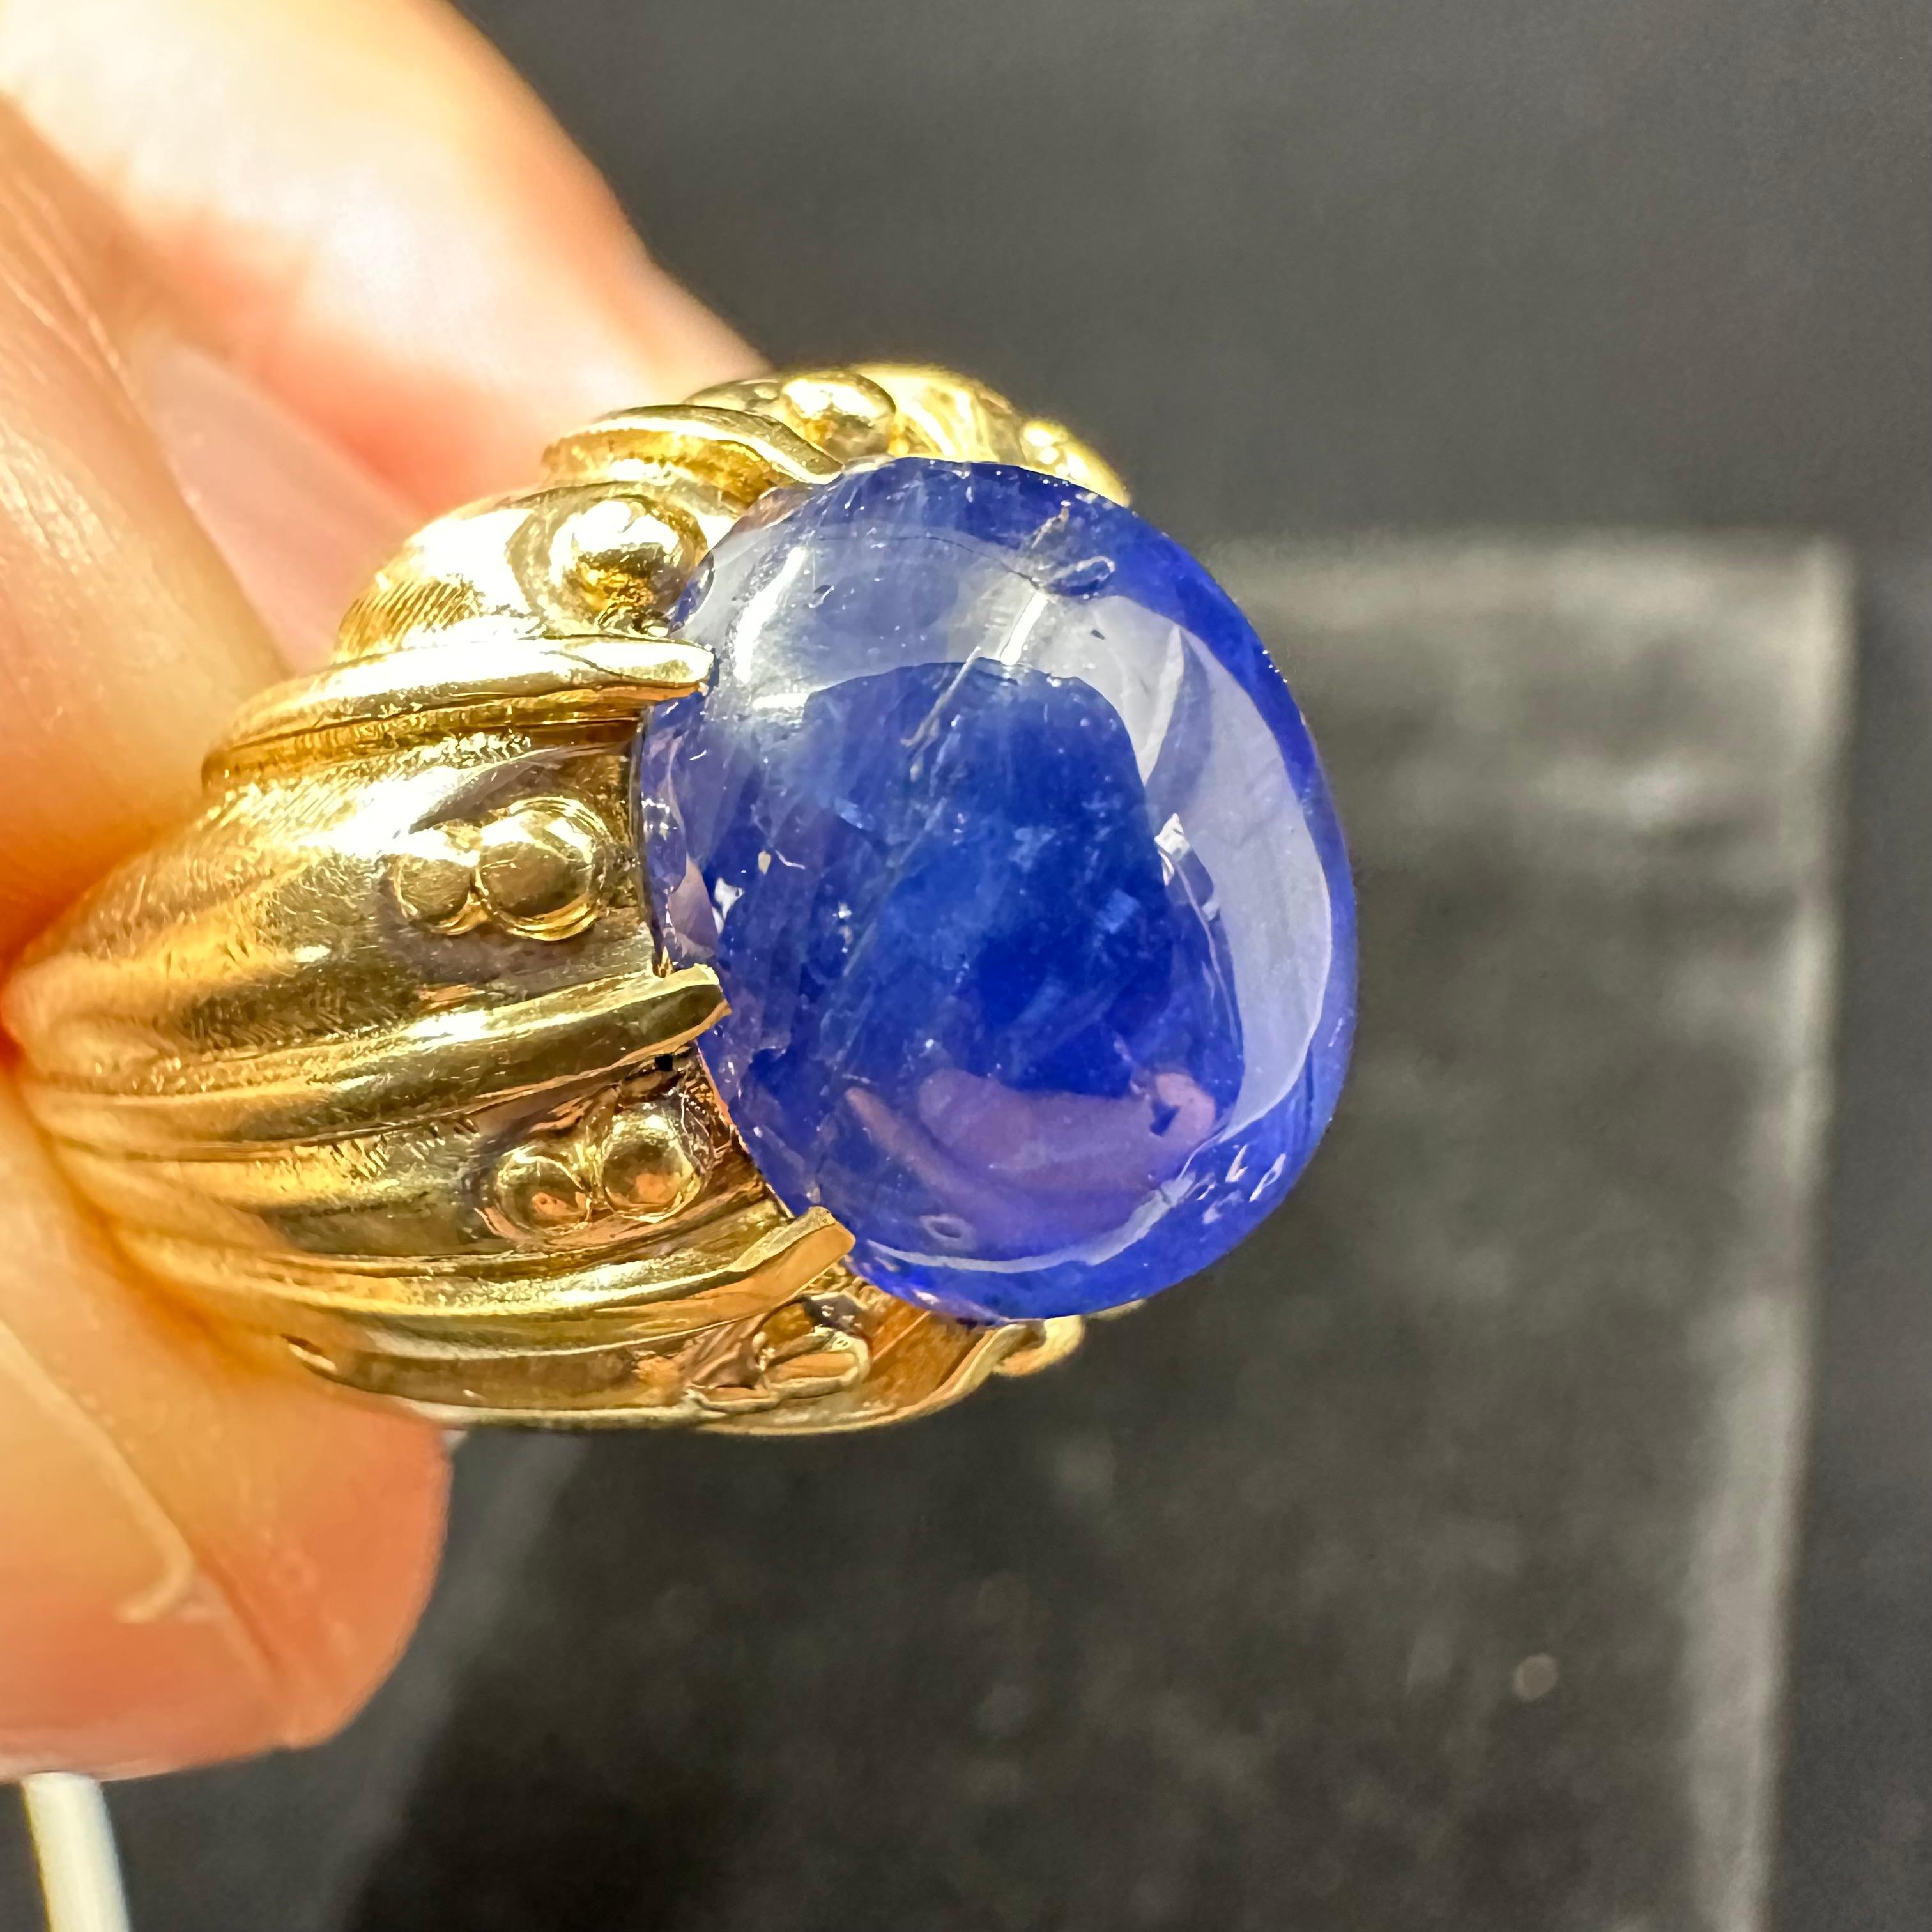 Van Cleef & Arpels Cabochon Burma Sapphire 7.32 cts  For Sale 8